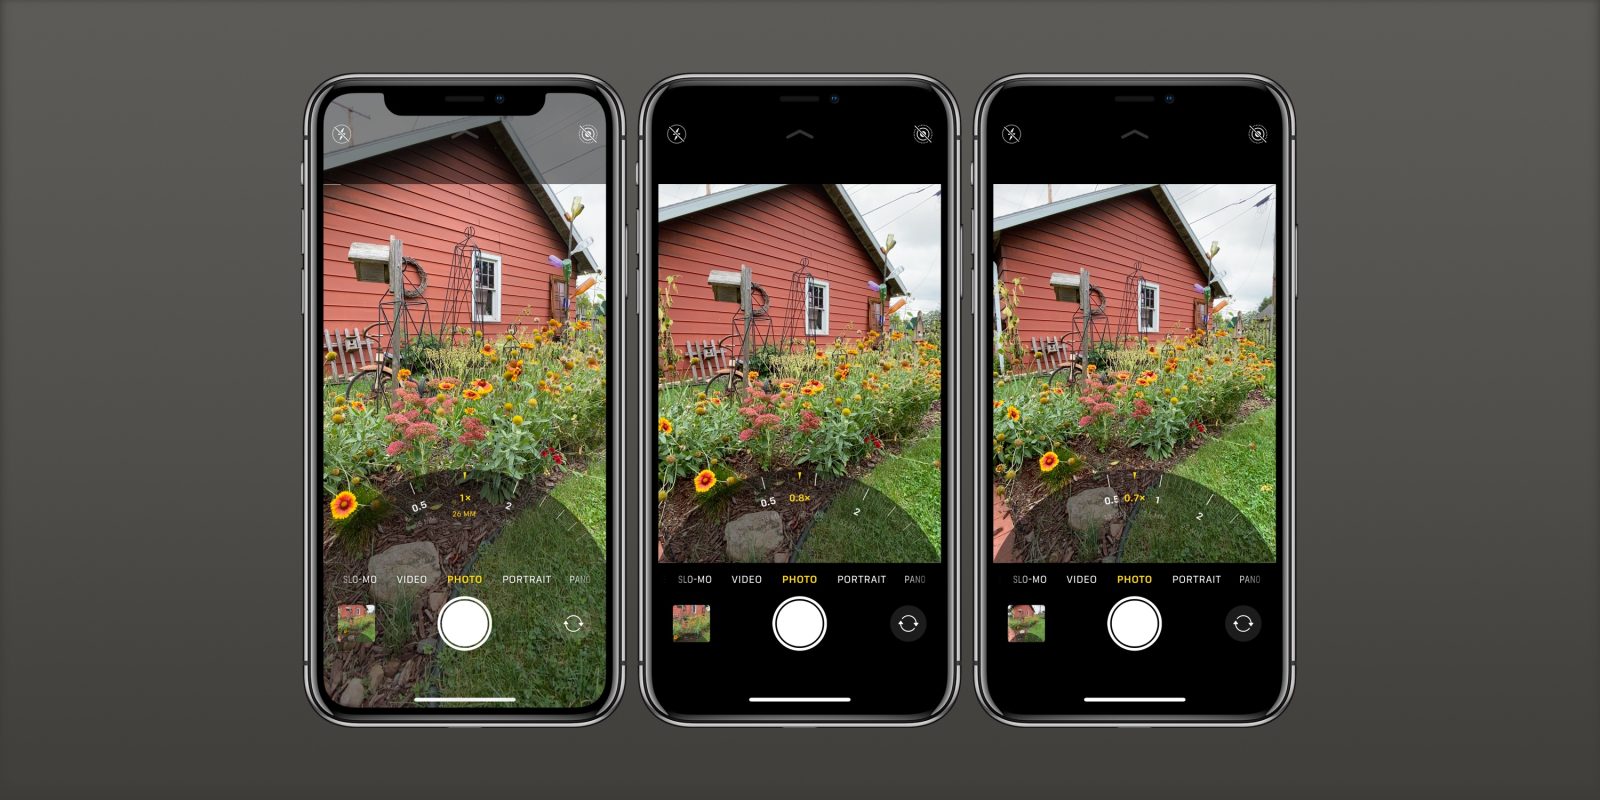 How to use ultra wide camera iPhone 11 and iPhone 11 Pro